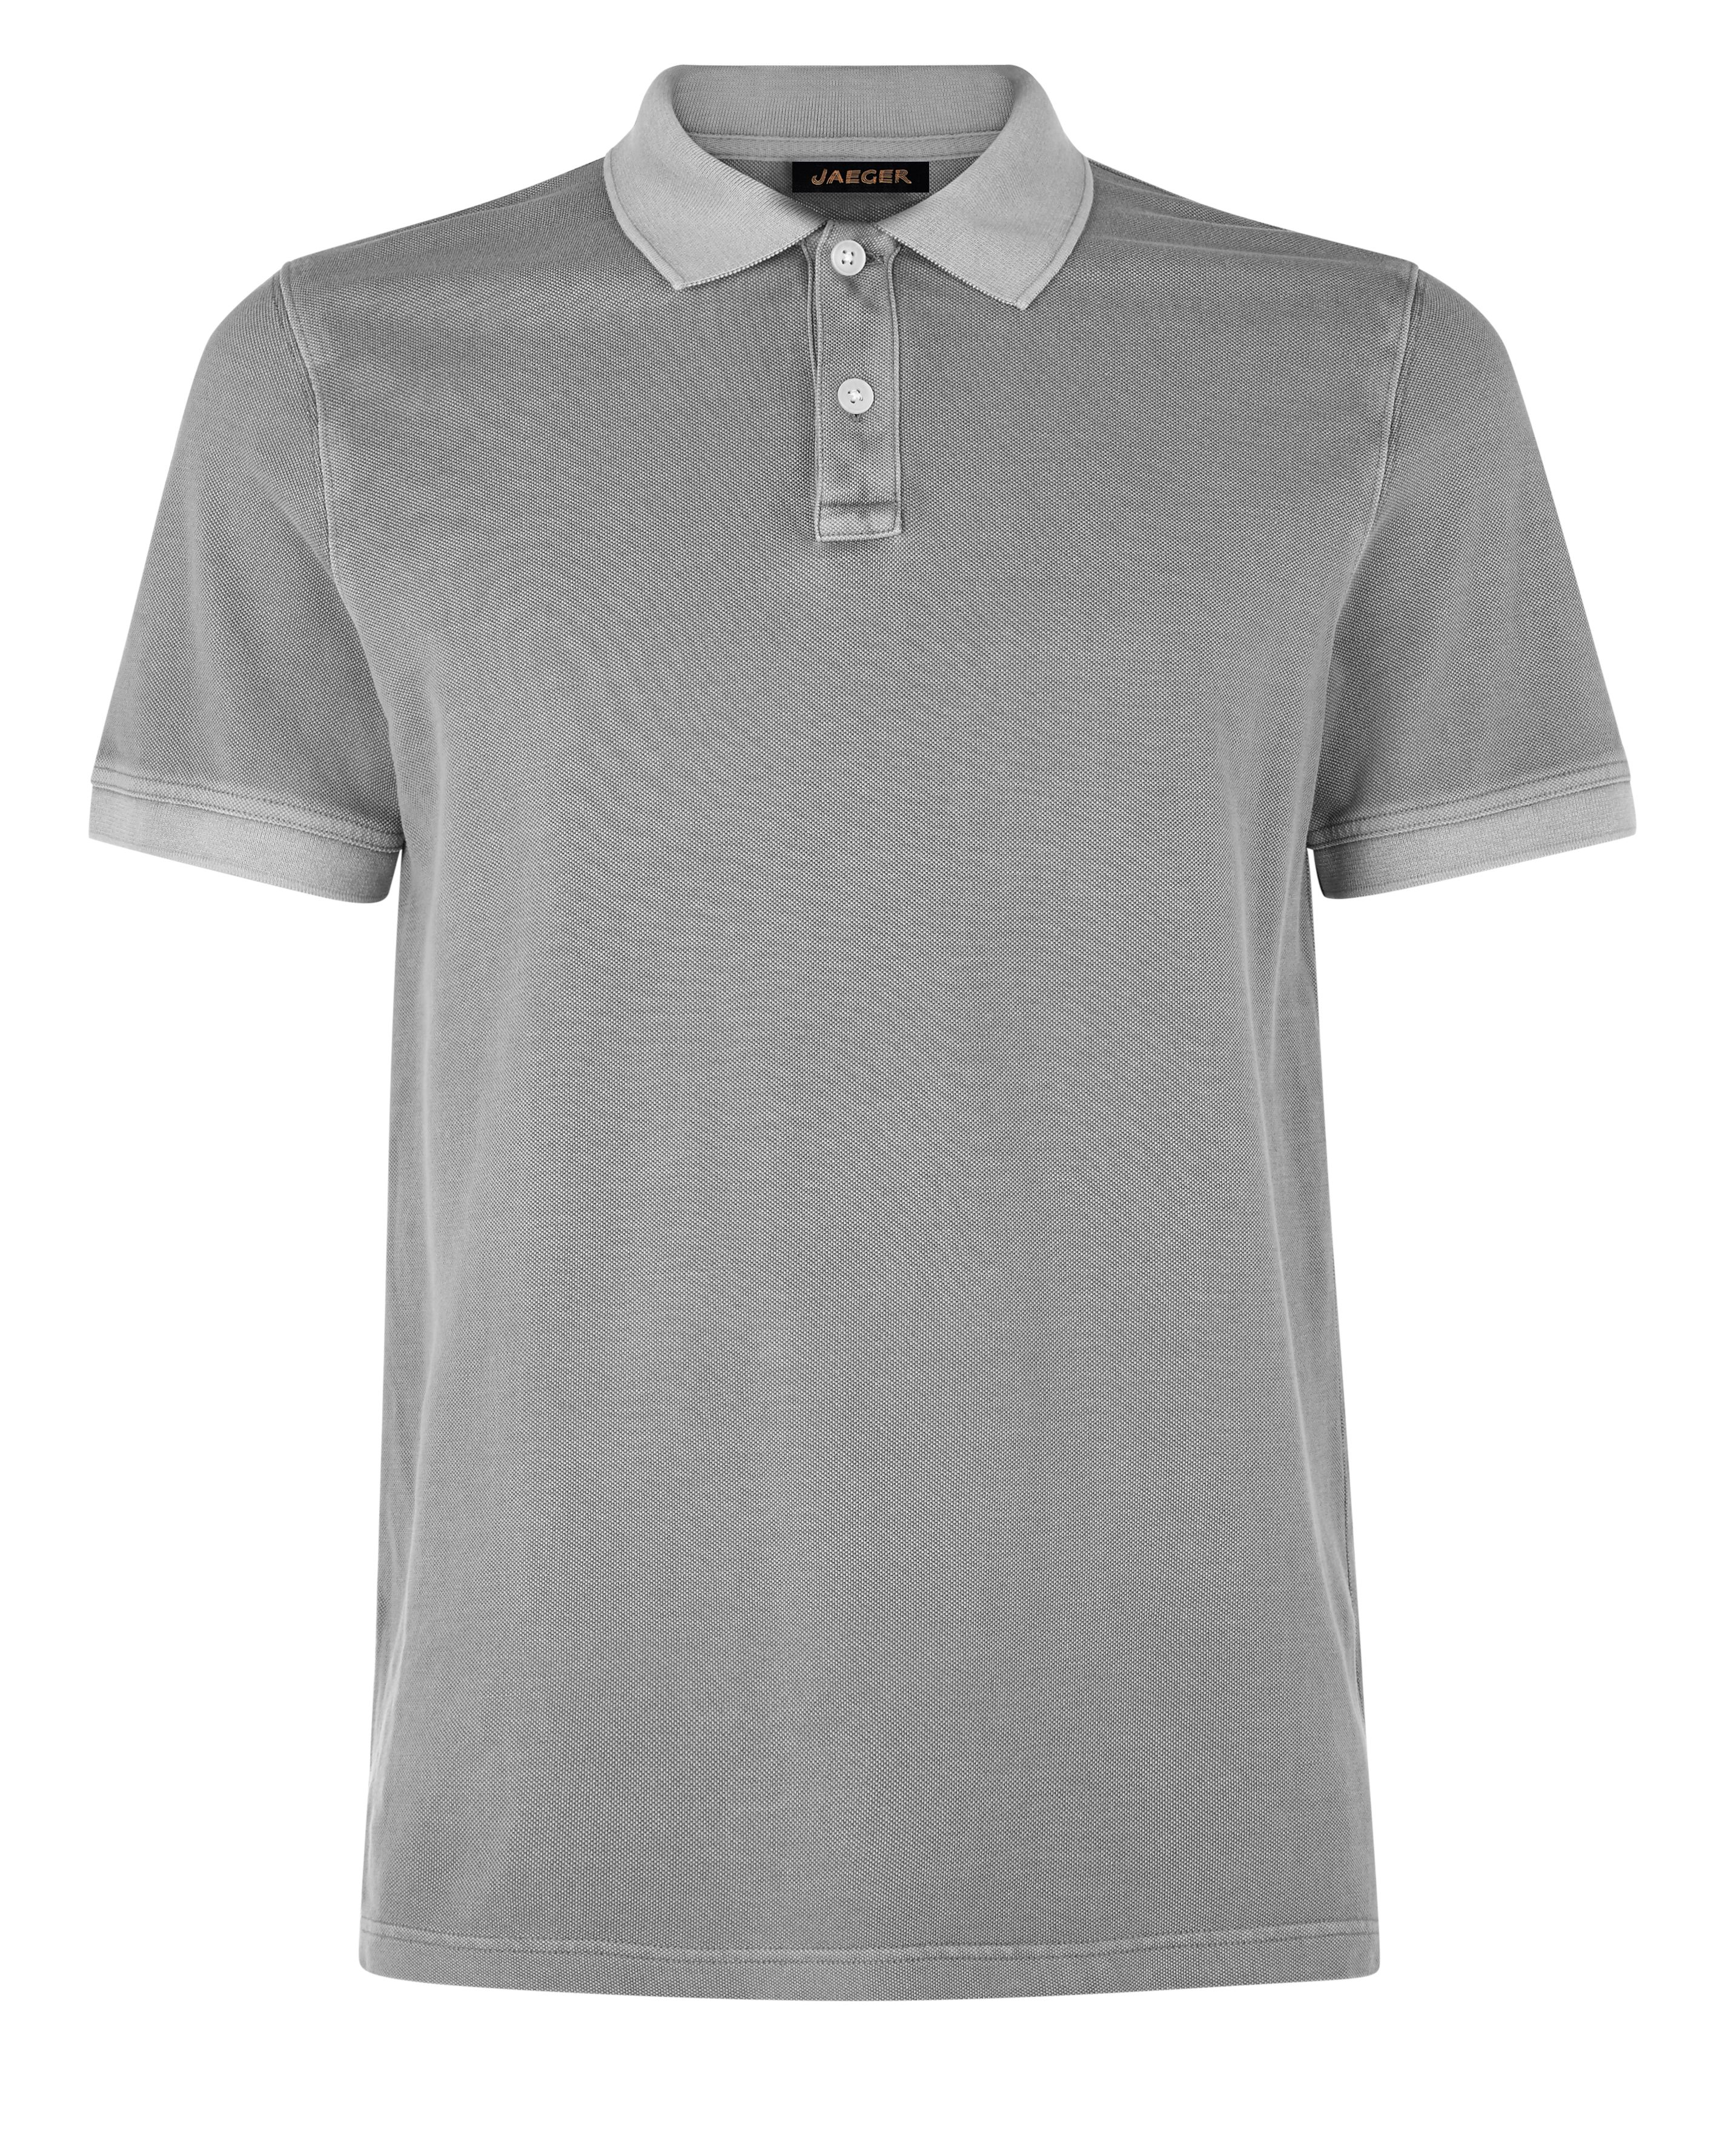 Jaeger Plain Polo Regular Fit Polo Shirt in Gray for Men (Grey) | Lyst